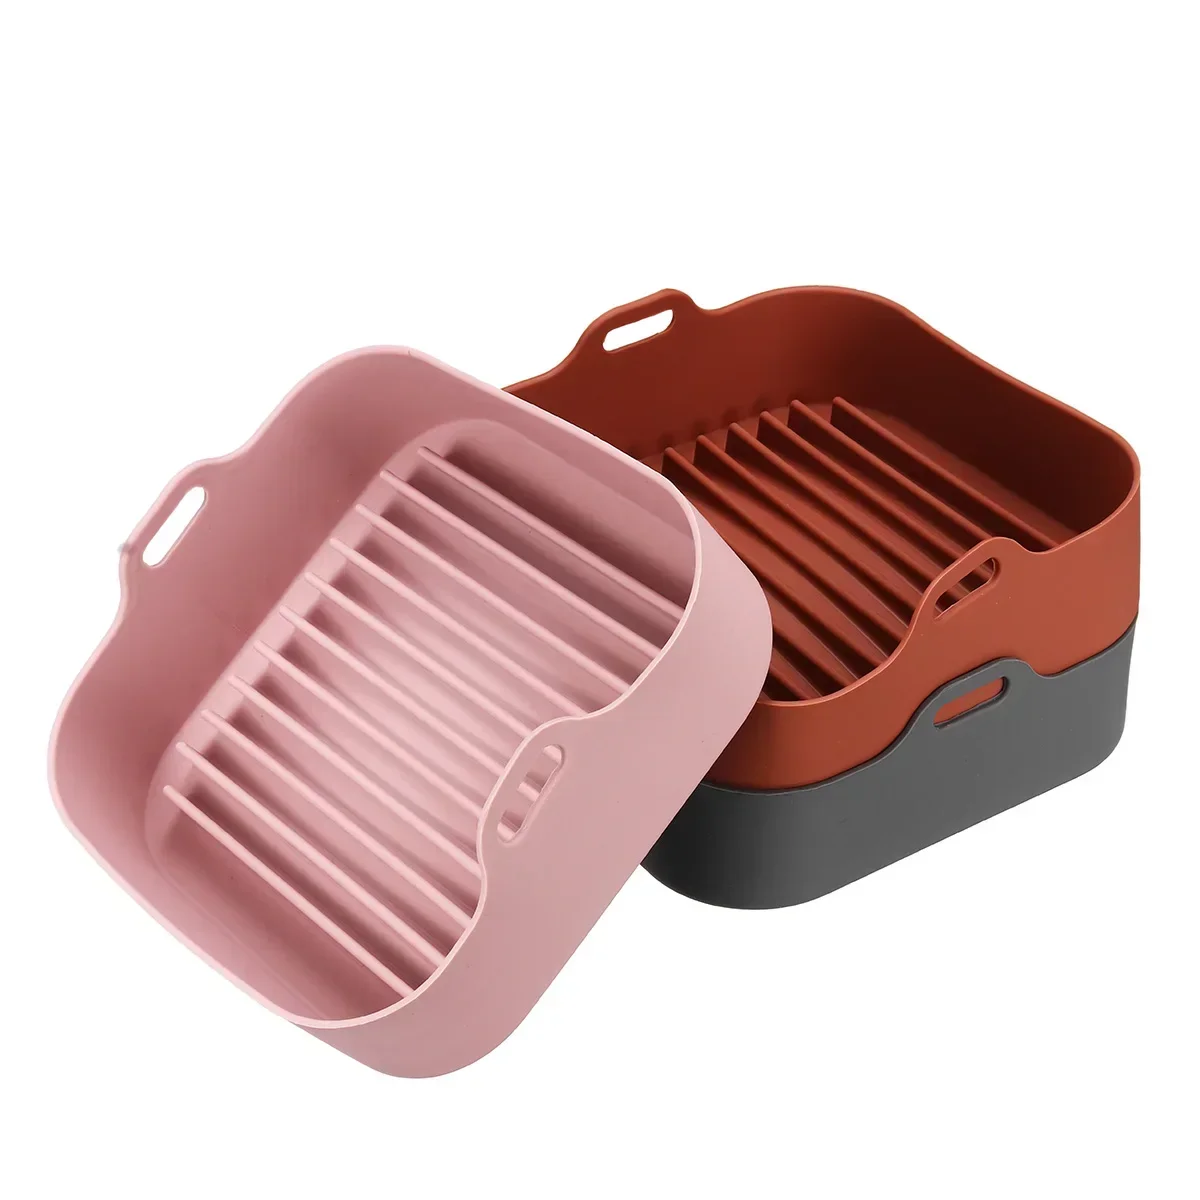 

8 inch Reusable Silicone Pot Heat-resistant Thick BBQ Bread Chicken Pizza Basket Baking Tray Air Fryers Oven Heated Tray Basket